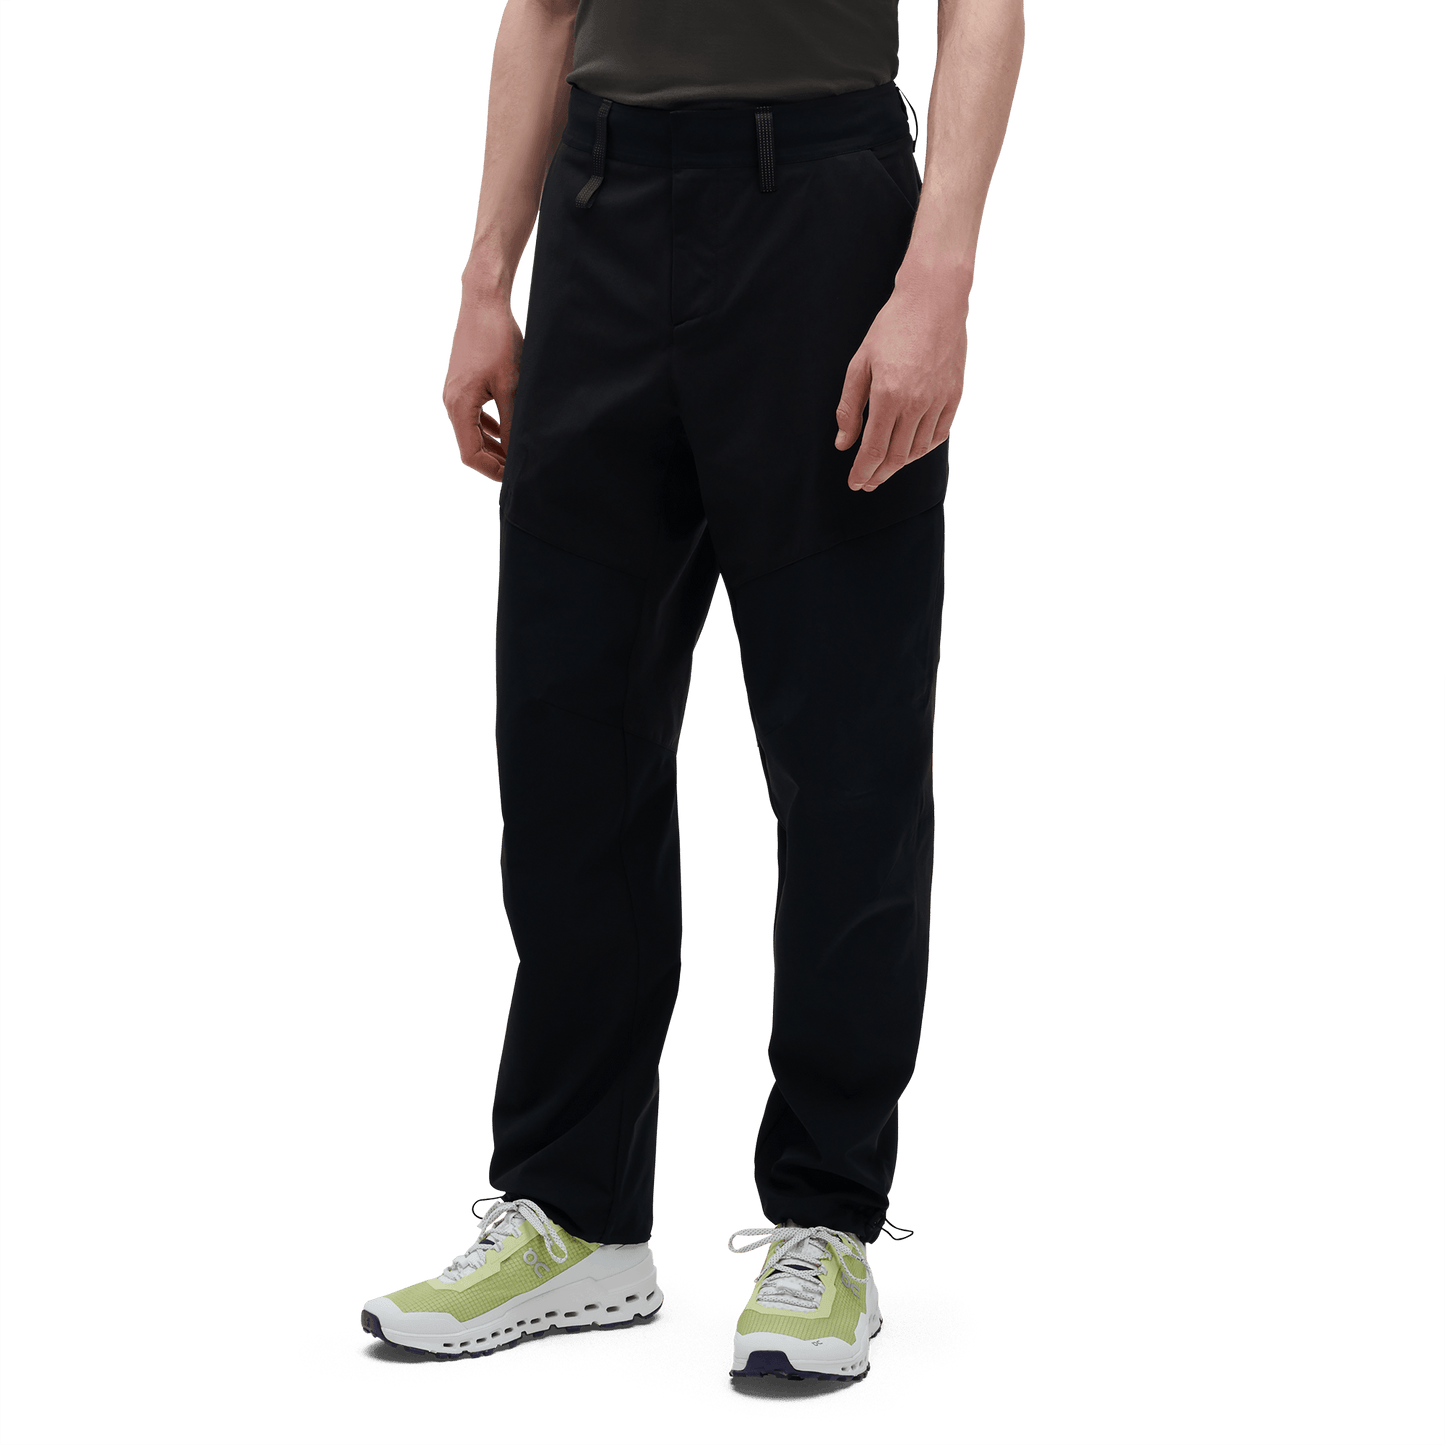 On Men's Explorer Pants - Parkway Fitted